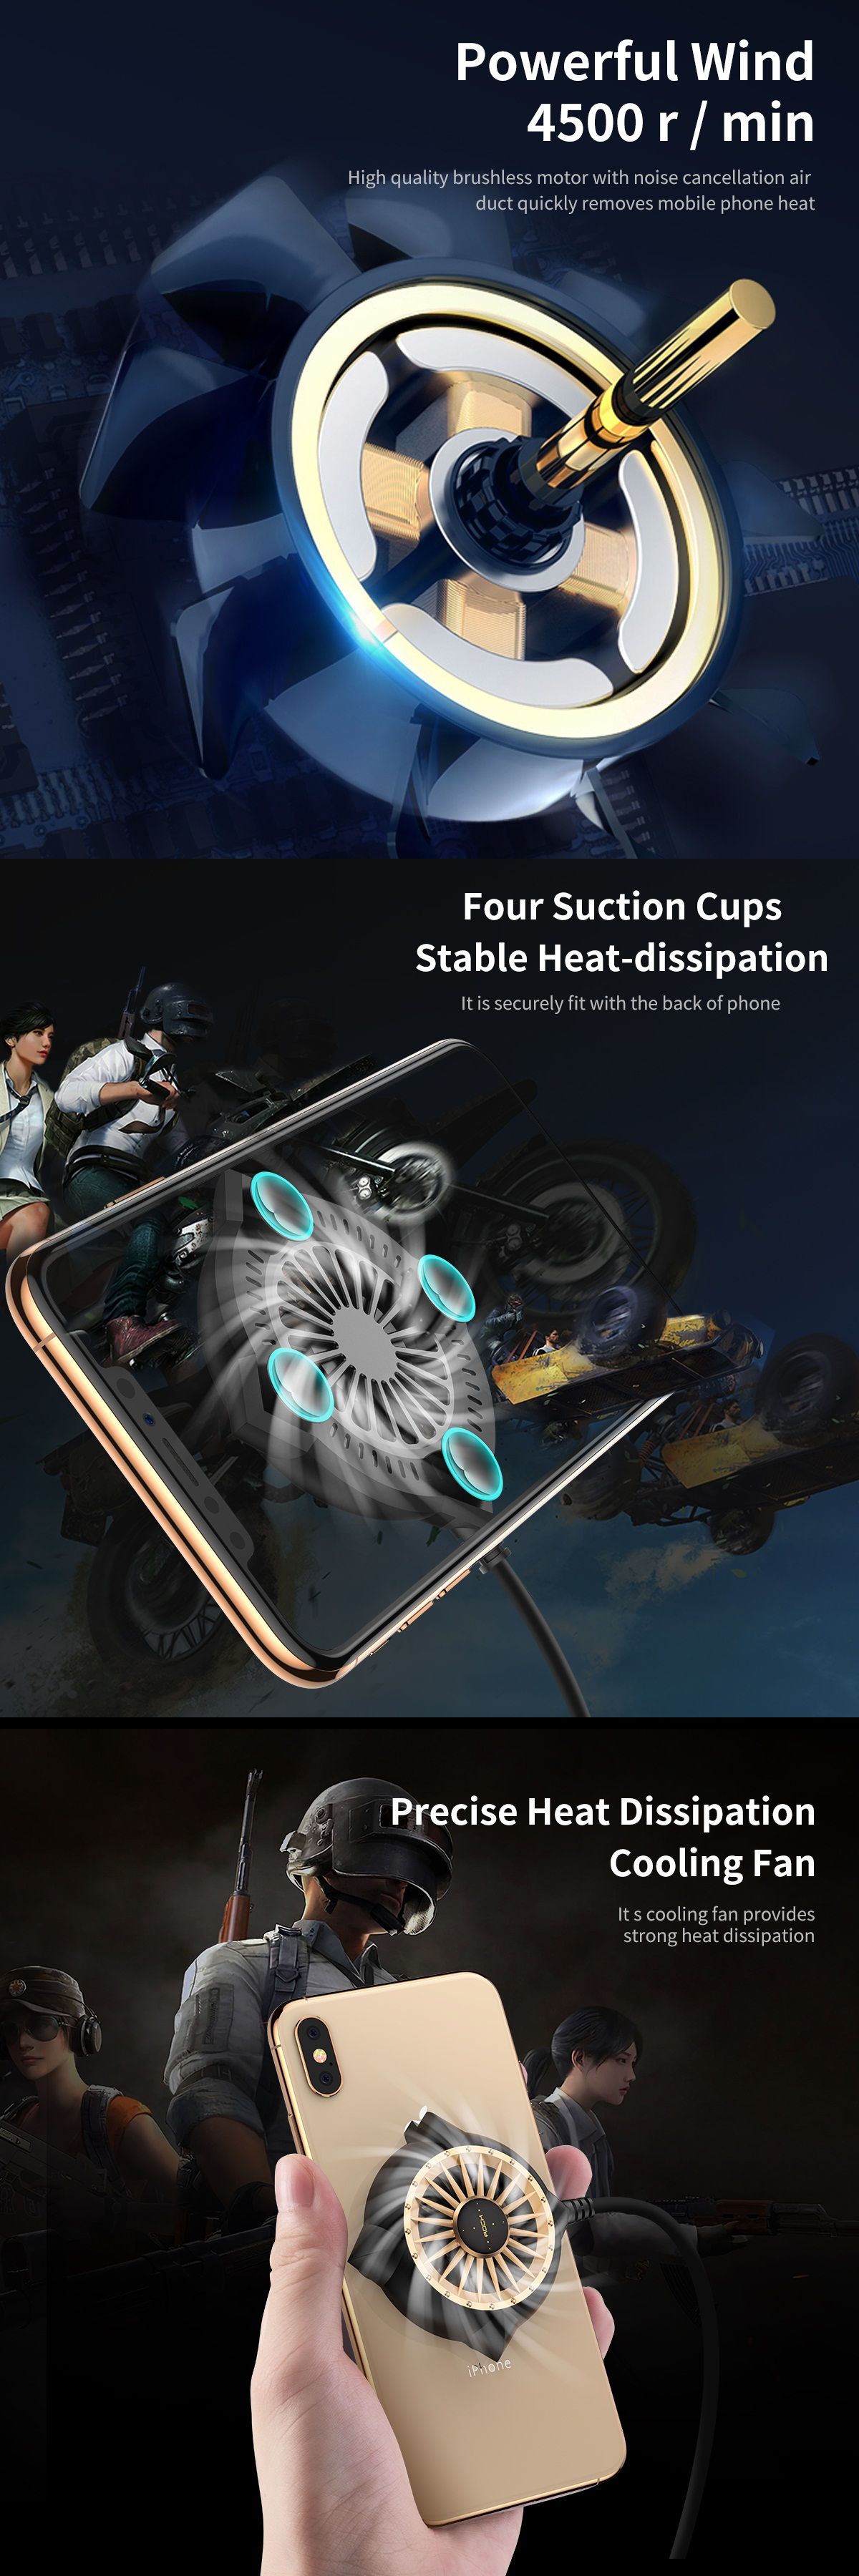 ROCK-Silent-Suction-Cup-Mini-Powerful-Wind-Cooling-Fan-For-iPhone-X-XS-HUAWEI-P30-S10-1543908